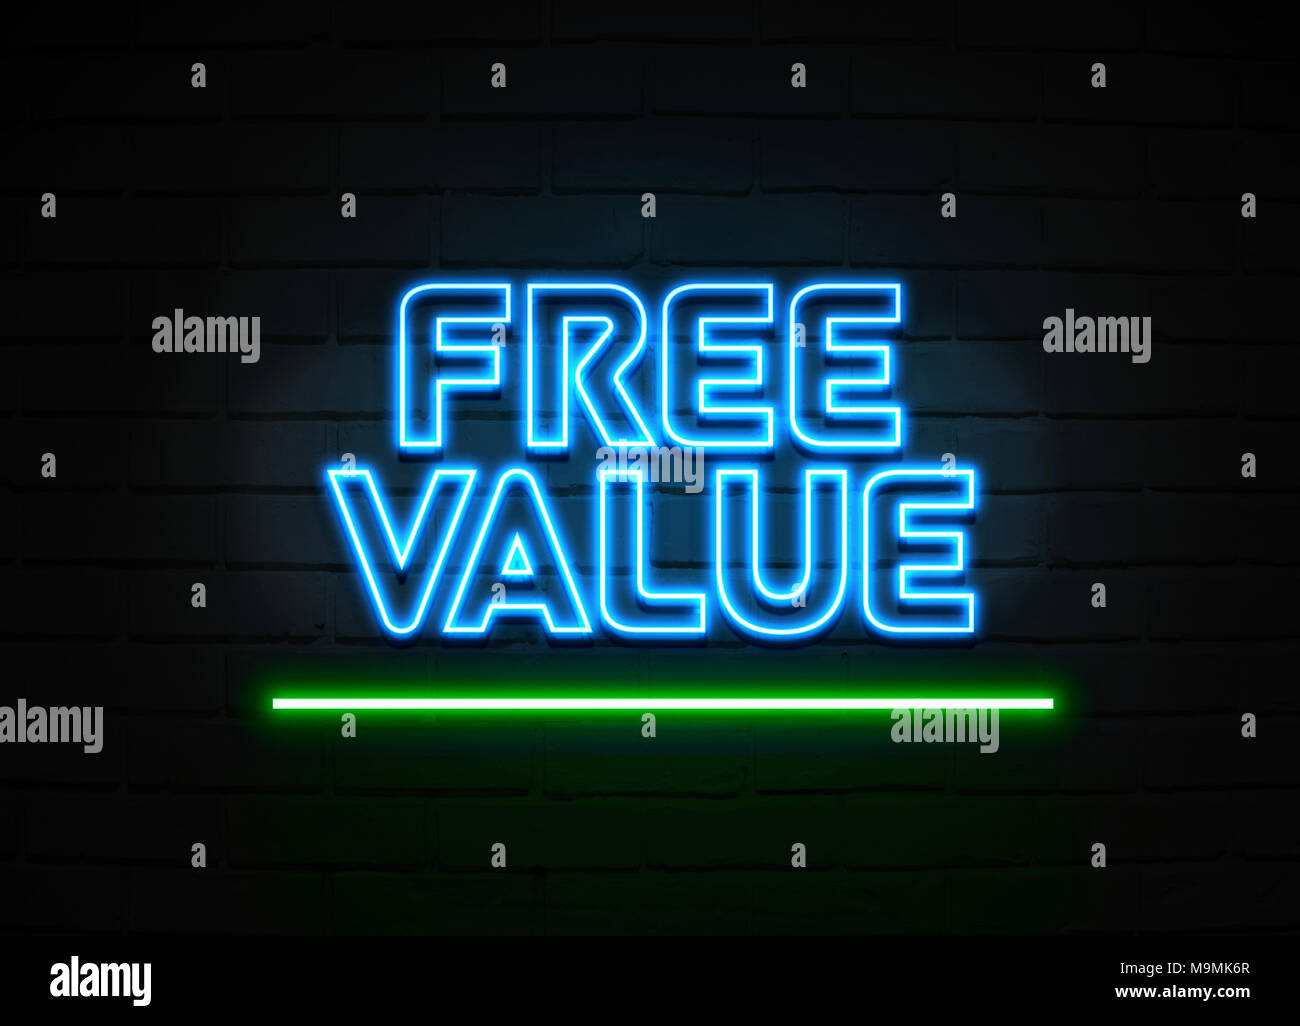 Free Value neon sign - Glowing Neon Sign on brickwall wall - 3D rendered royalty free stock illustration. Stock Photo